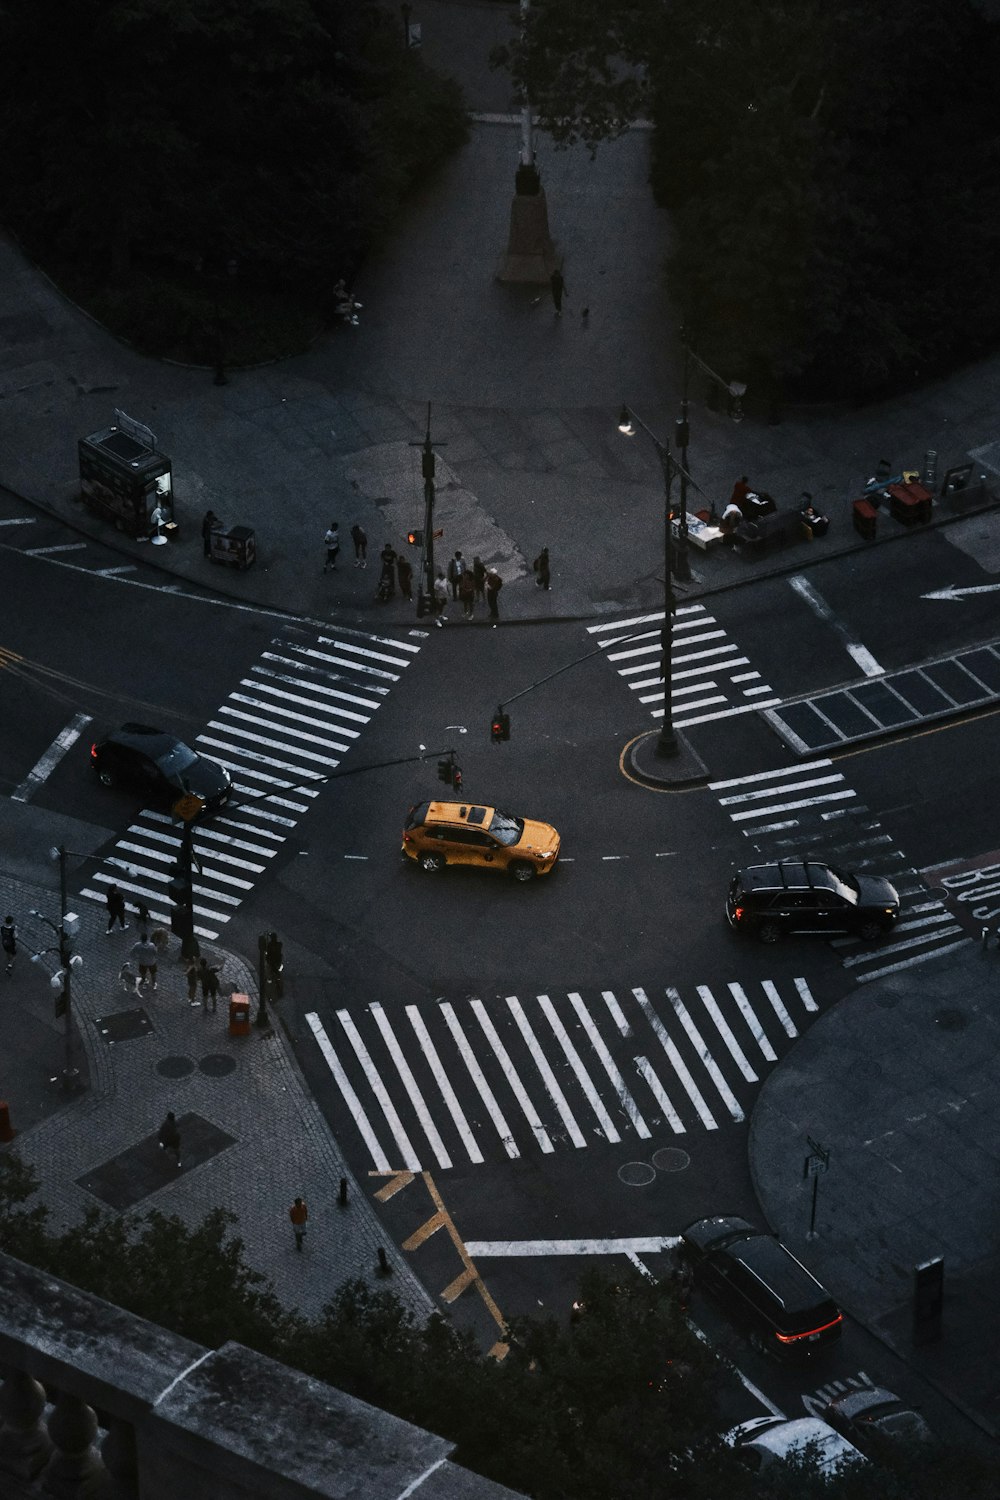 a yellow taxi cab driving down a street next to a traffic light